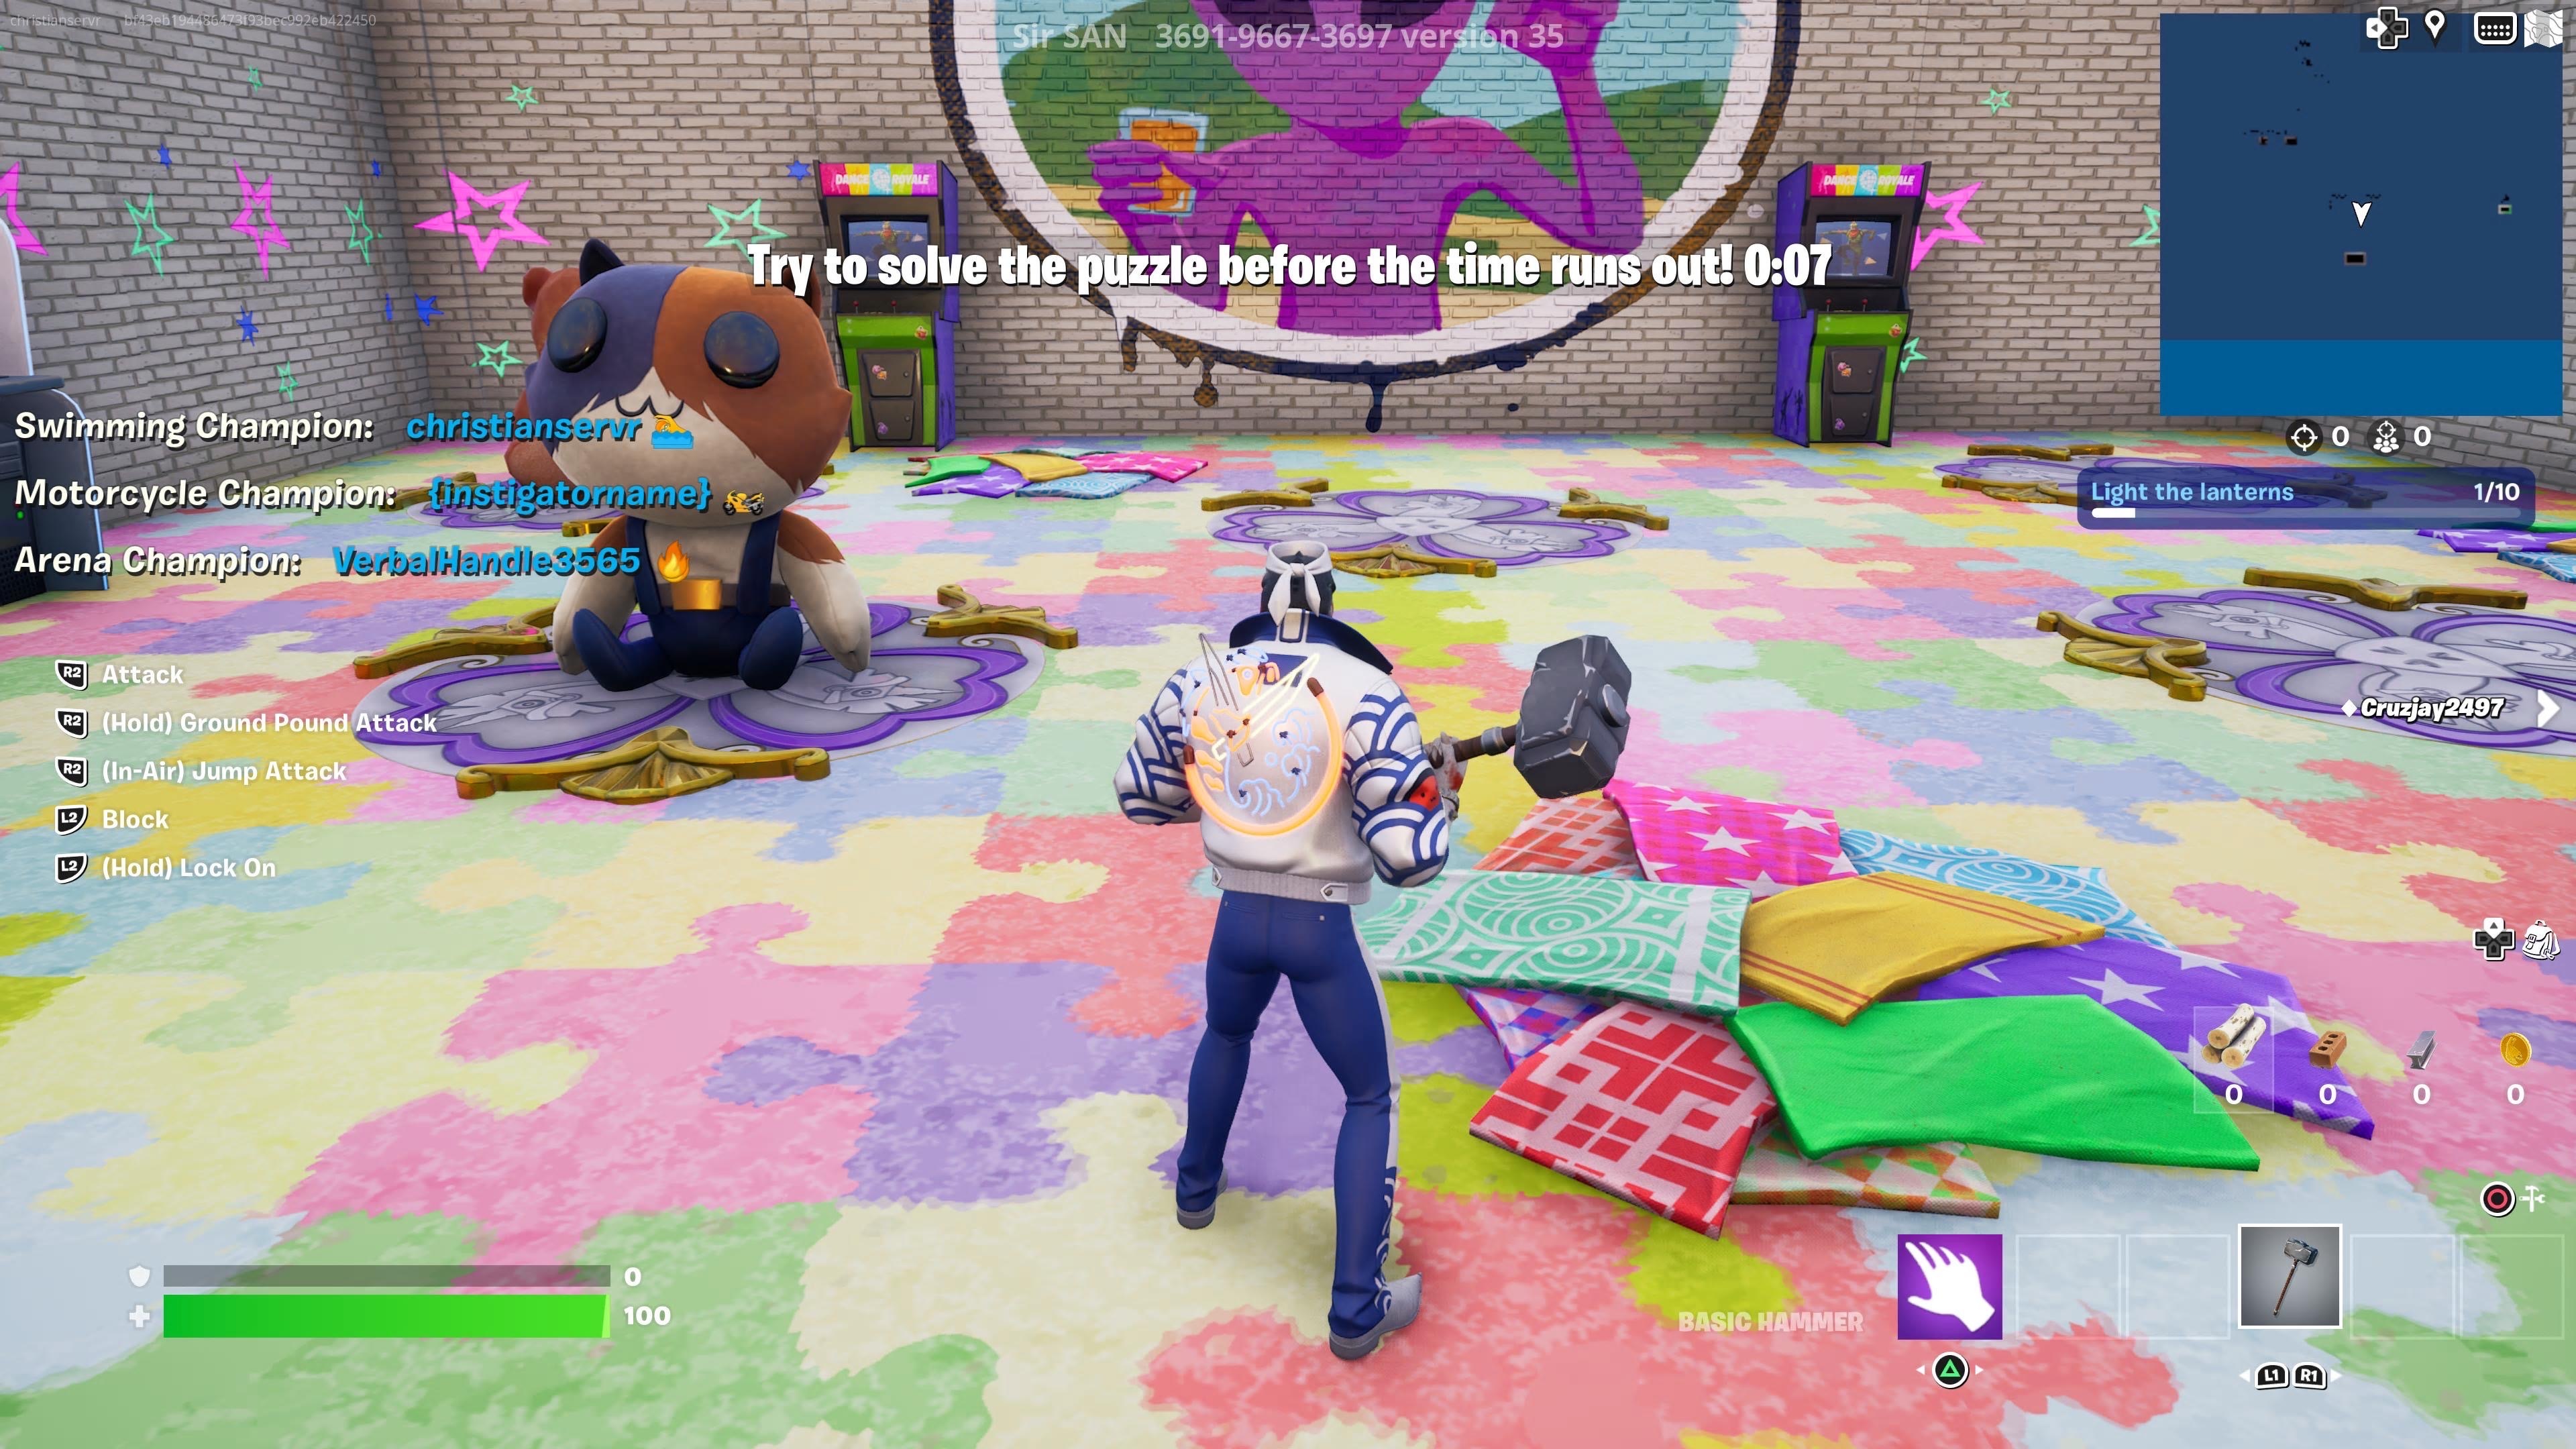 How to solve the purple puzzle in Fortnite's Lantern Fest Tour Dot